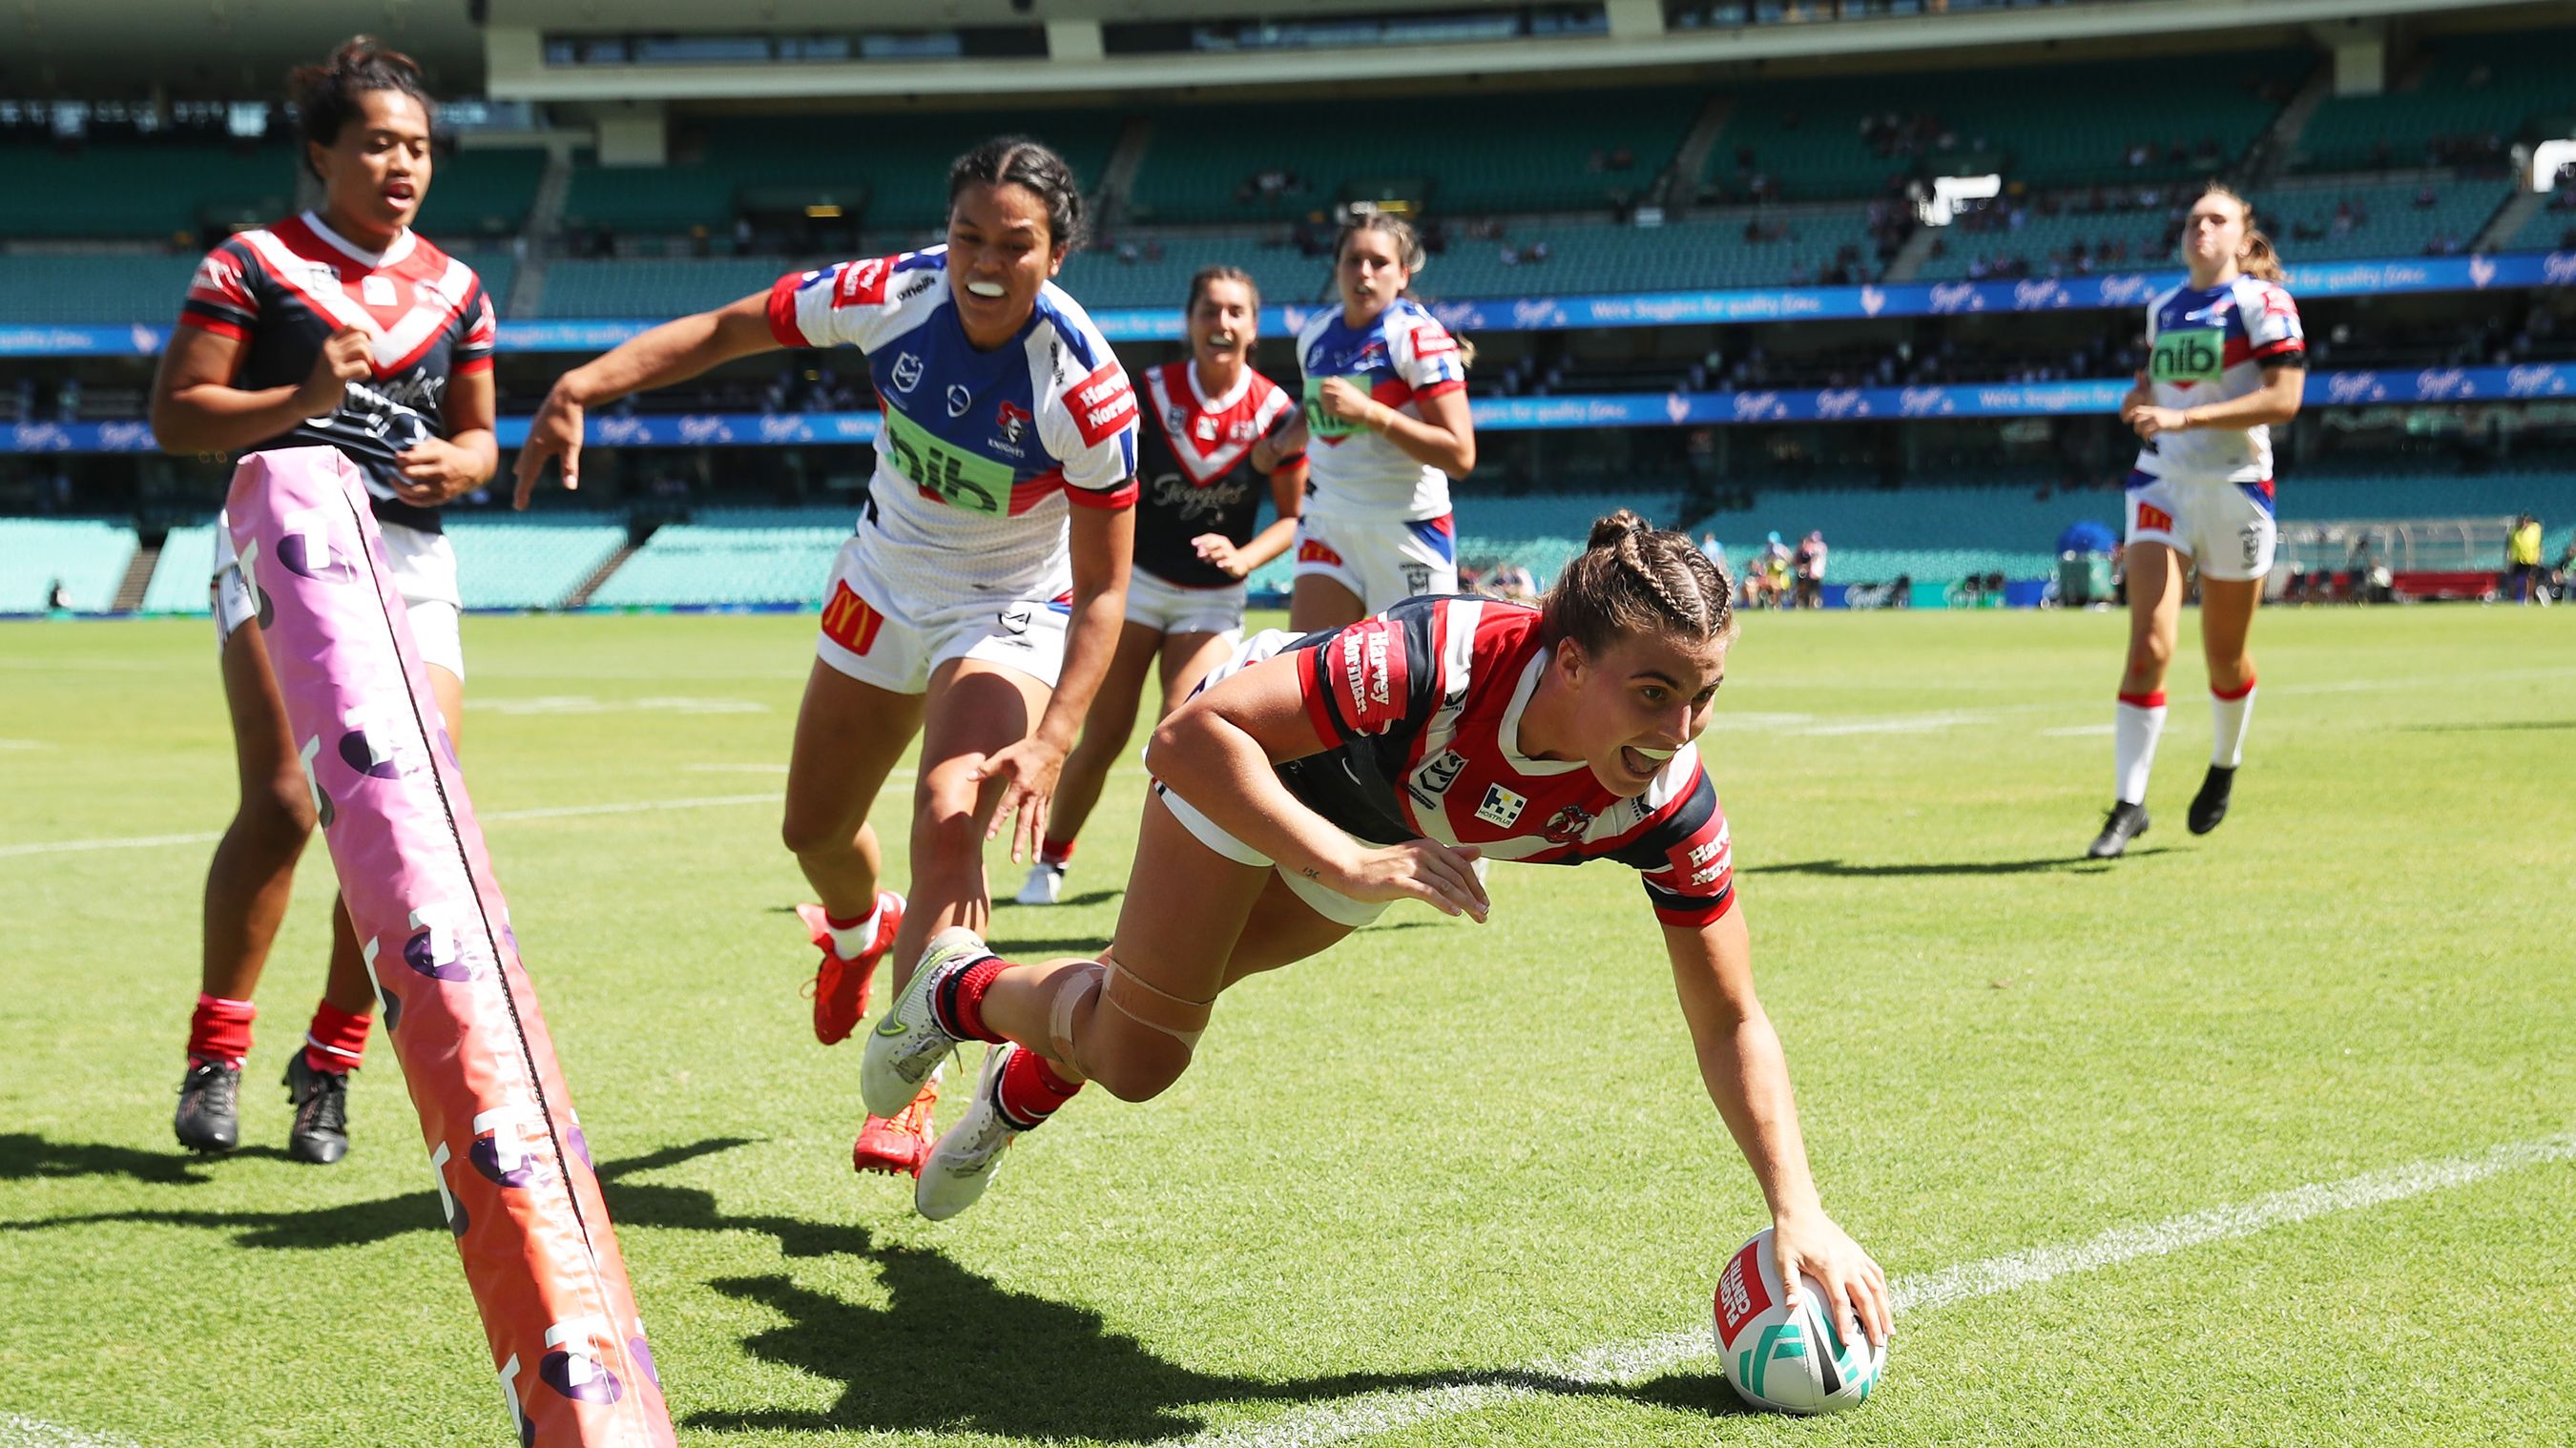 The Roosters&#x27; Jessica Sergis scores a try.